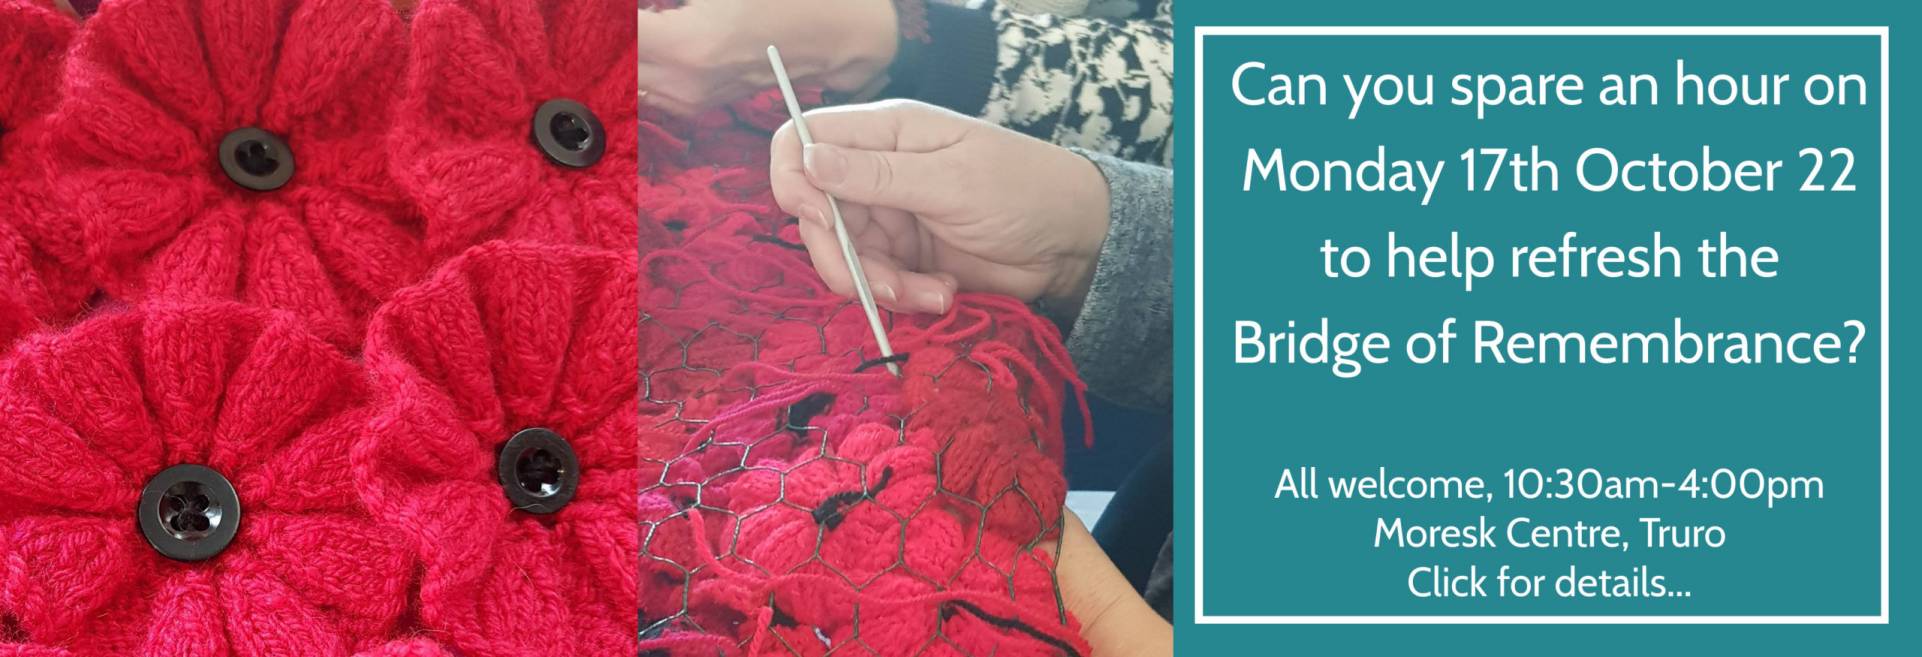 Appeal for help to knit and crochet poppies for Bridge of Remembrance